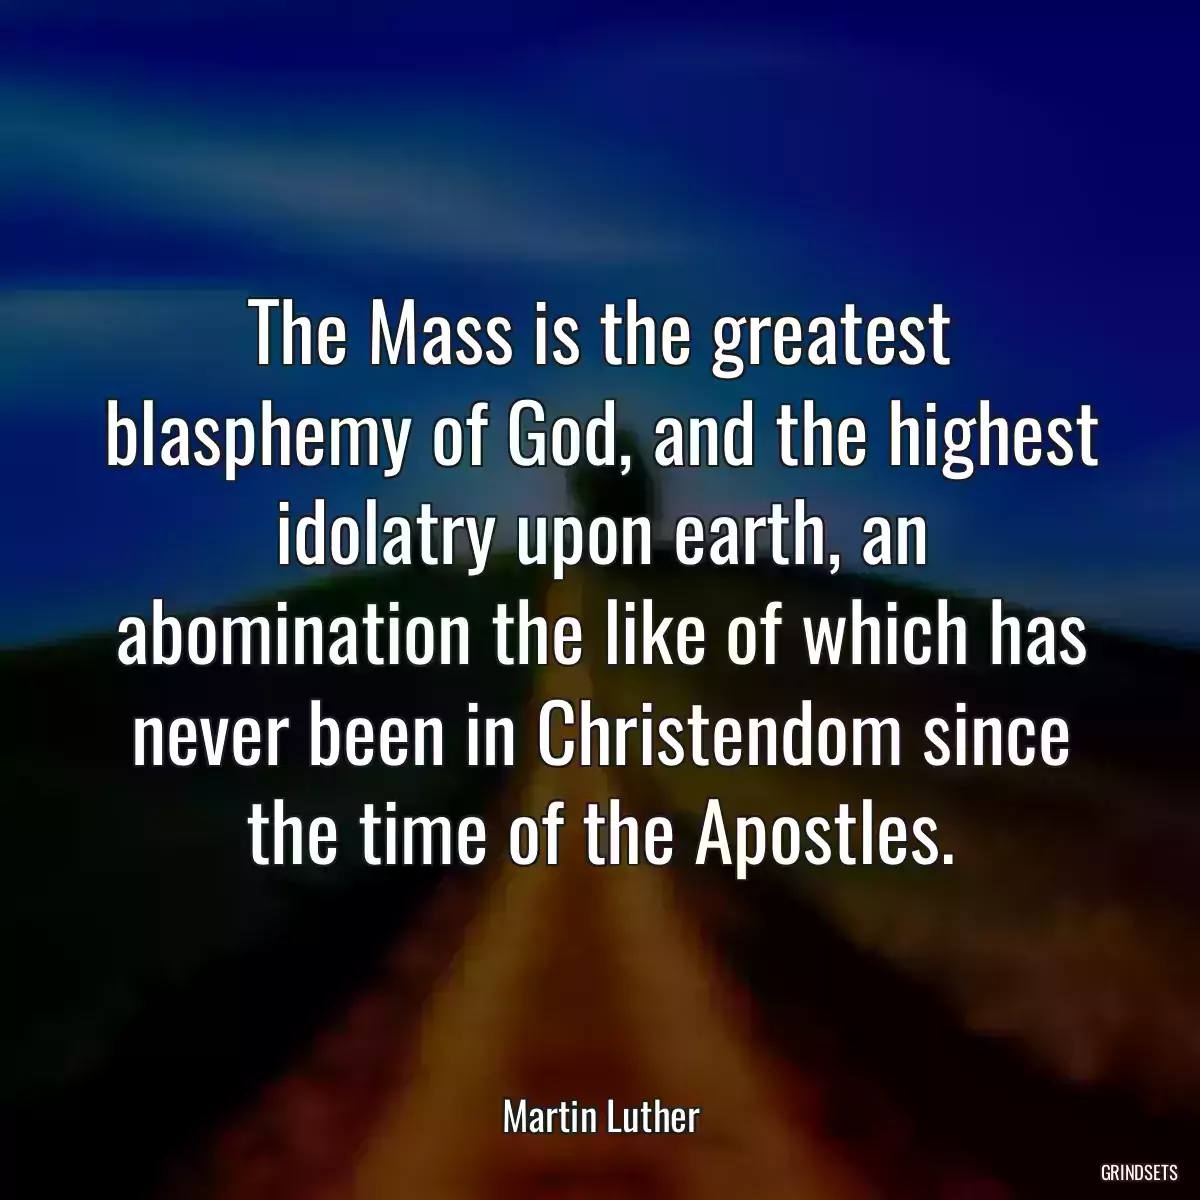 The Mass is the greatest blasphemy of God, and the highest idolatry upon earth, an abomination the like of which has never been in Christendom since the time of the Apostles.